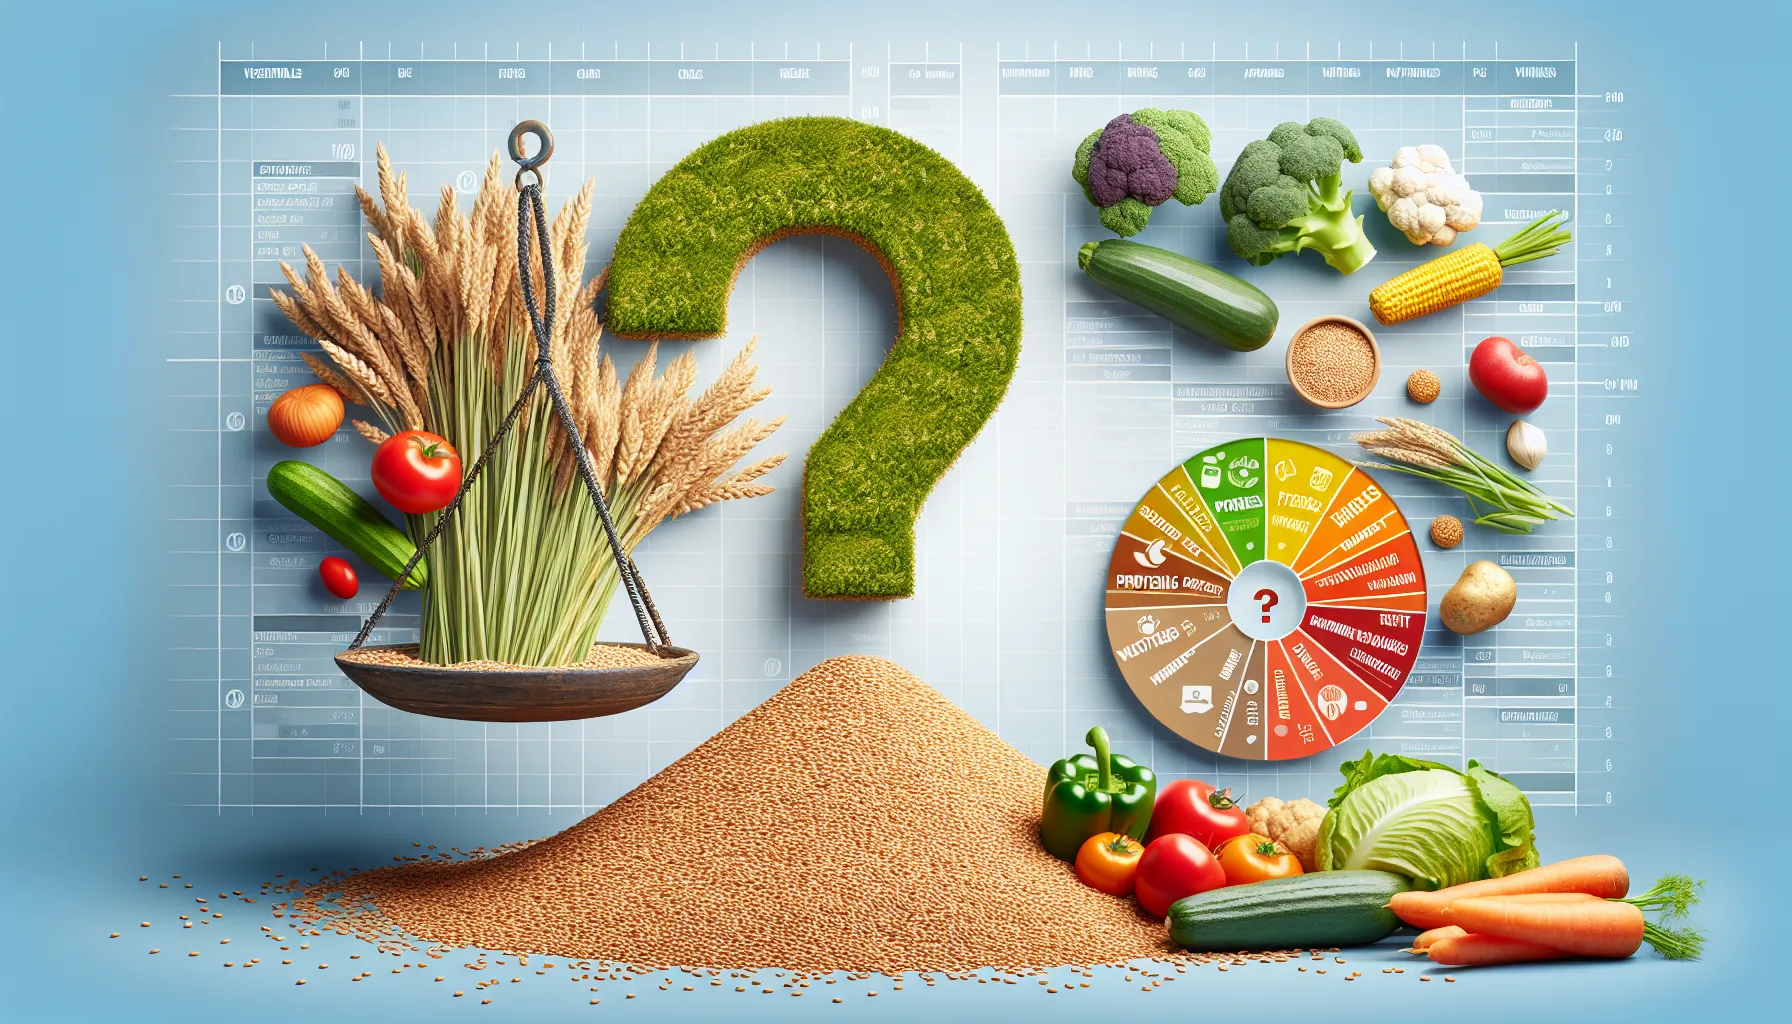 A composition featuring various vegetables and a large grass-covered question mark, with wheat sheaves on a balance scale, asking "Is wheat a vegetable?"